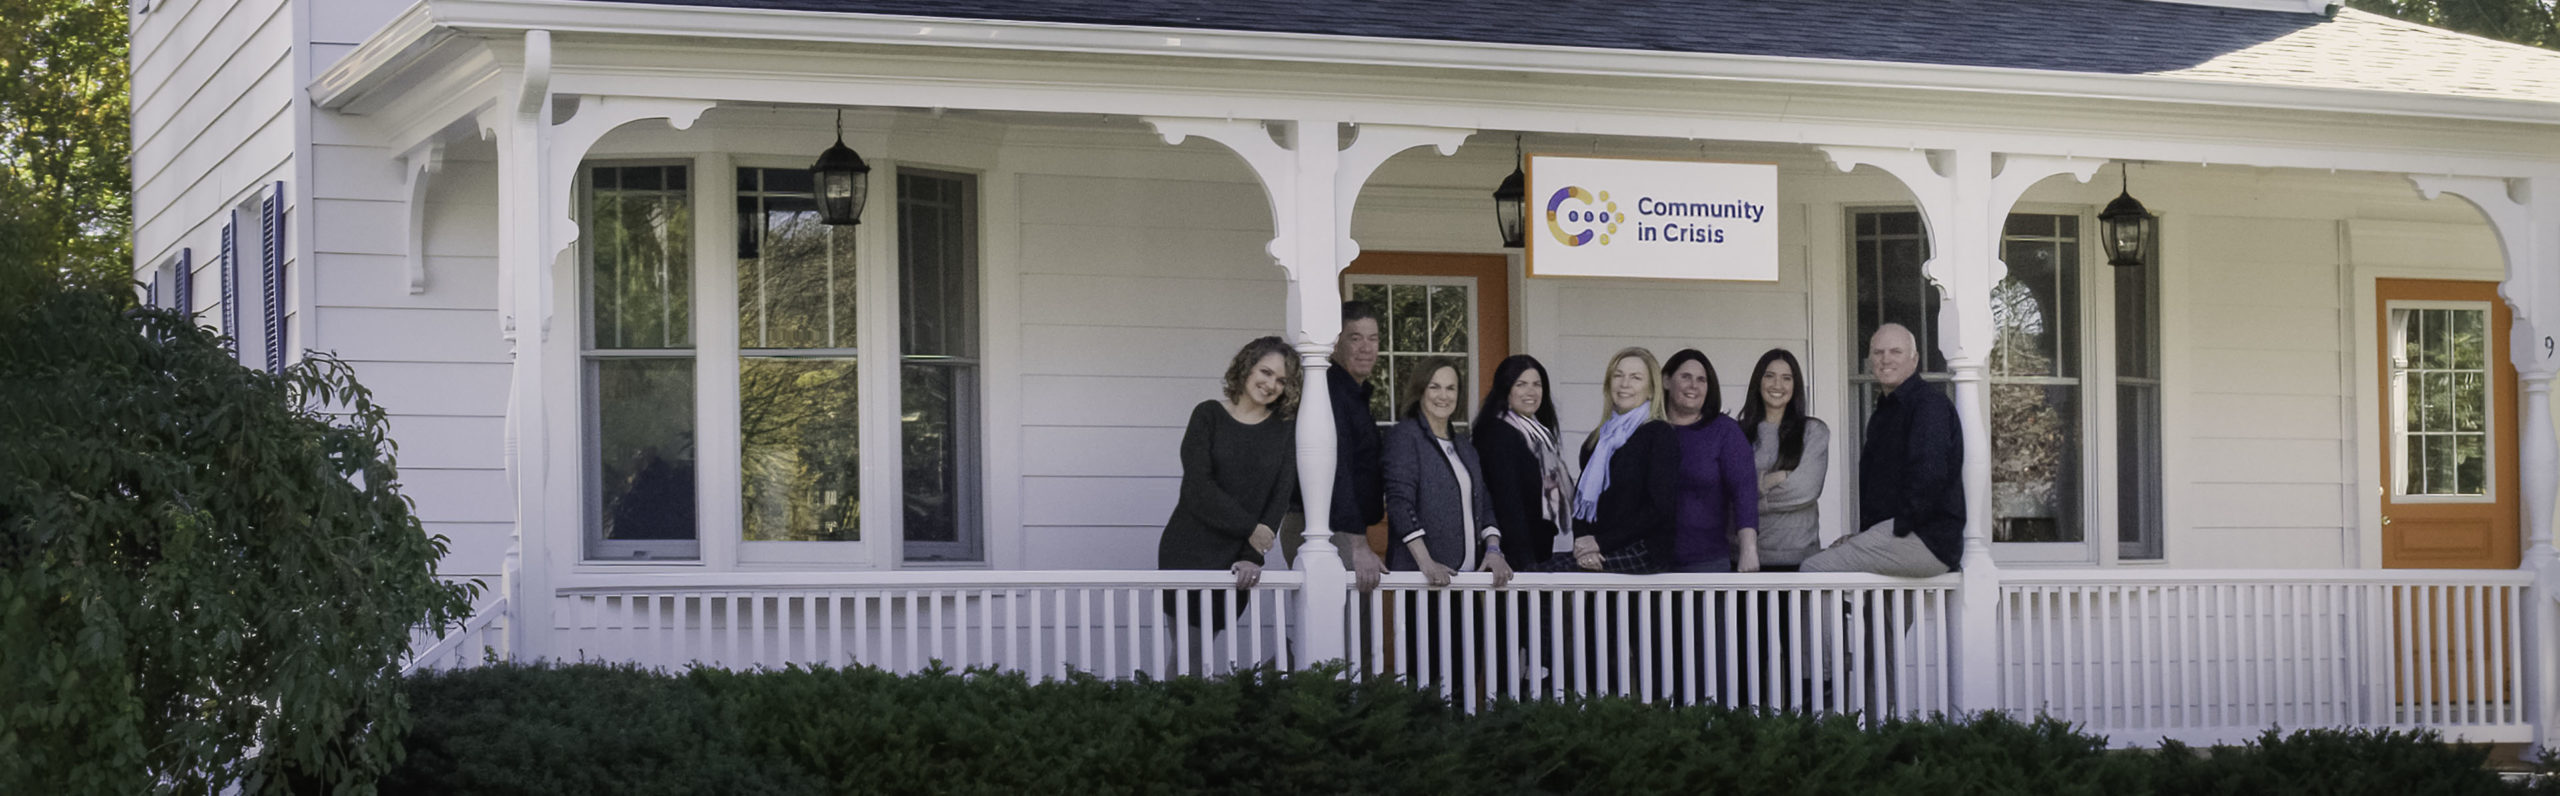 Community in Crisis awarded $100K grant for Community Peer Recovery Center